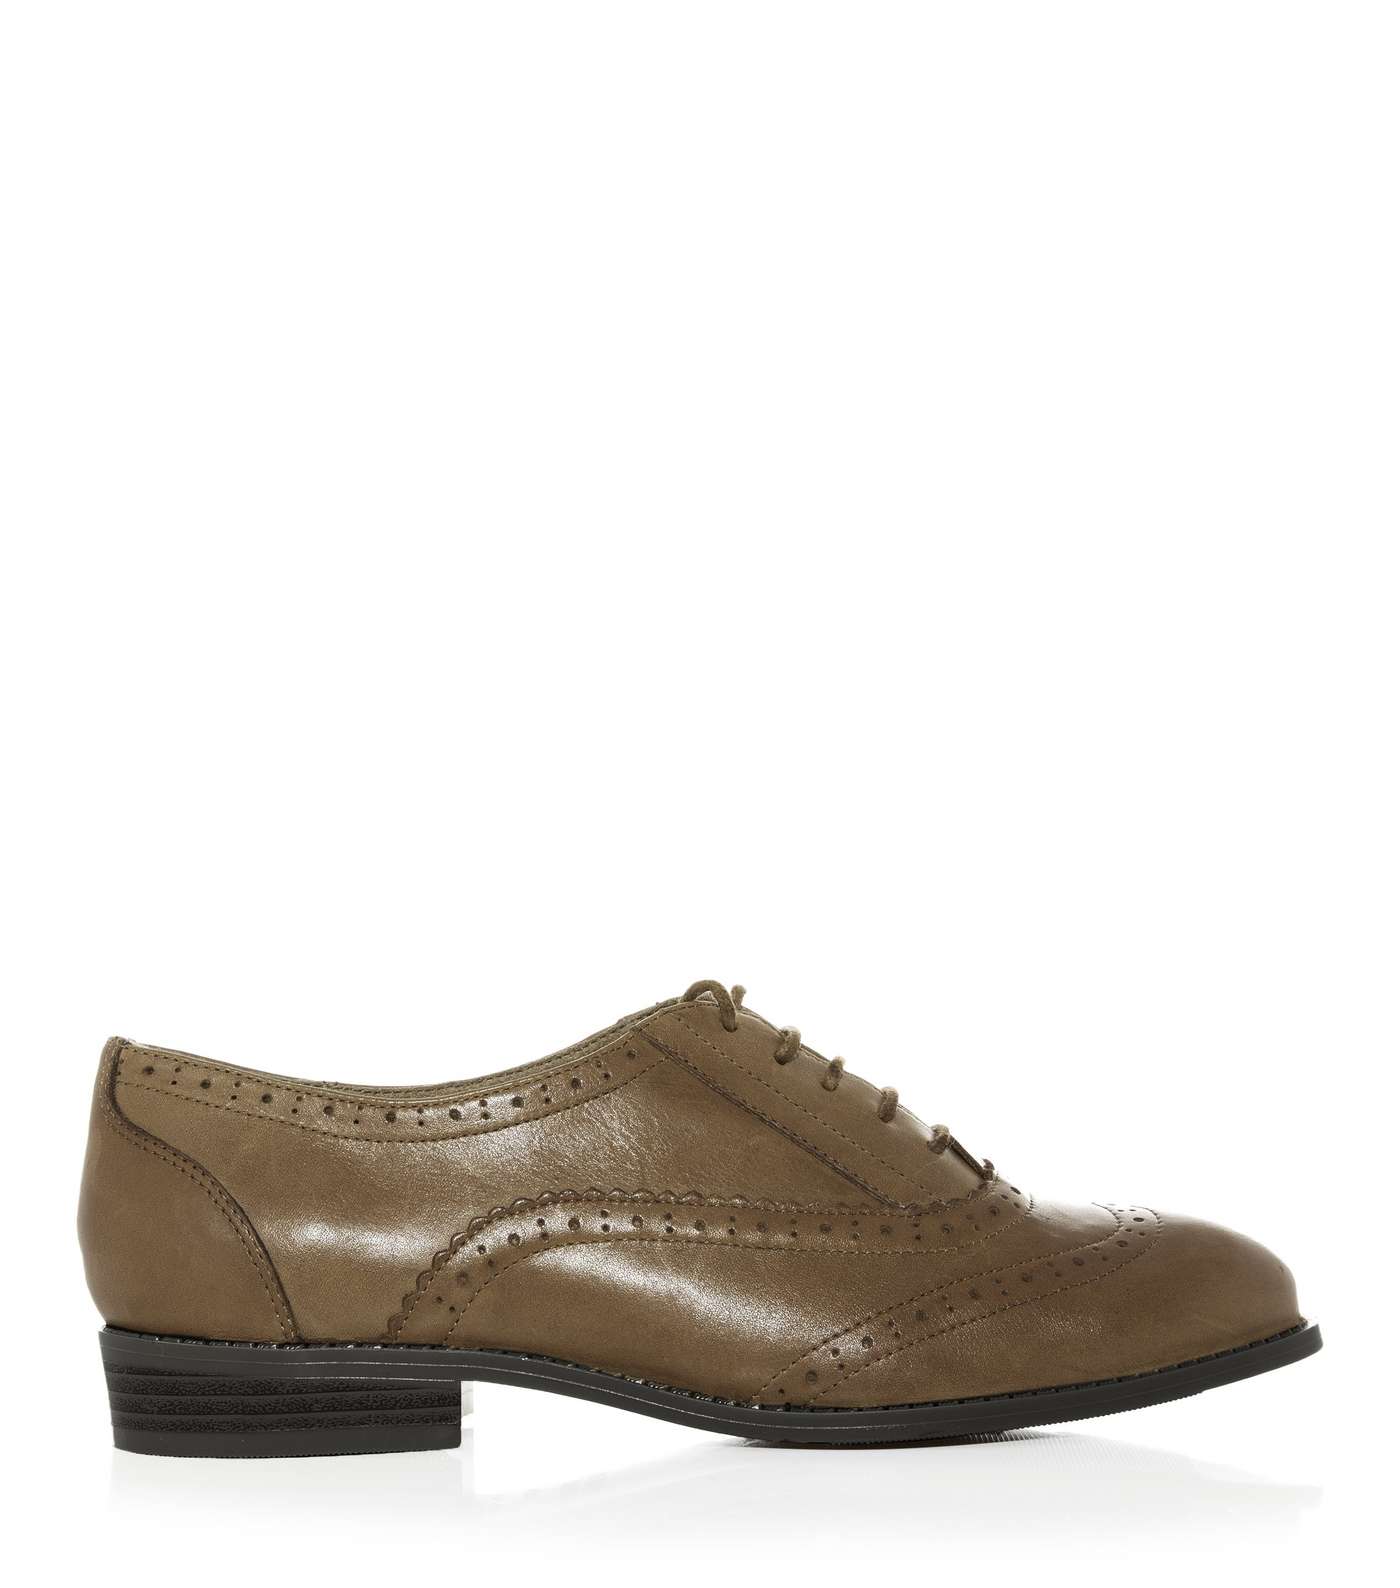 Tan Leather Lace Up Brogues